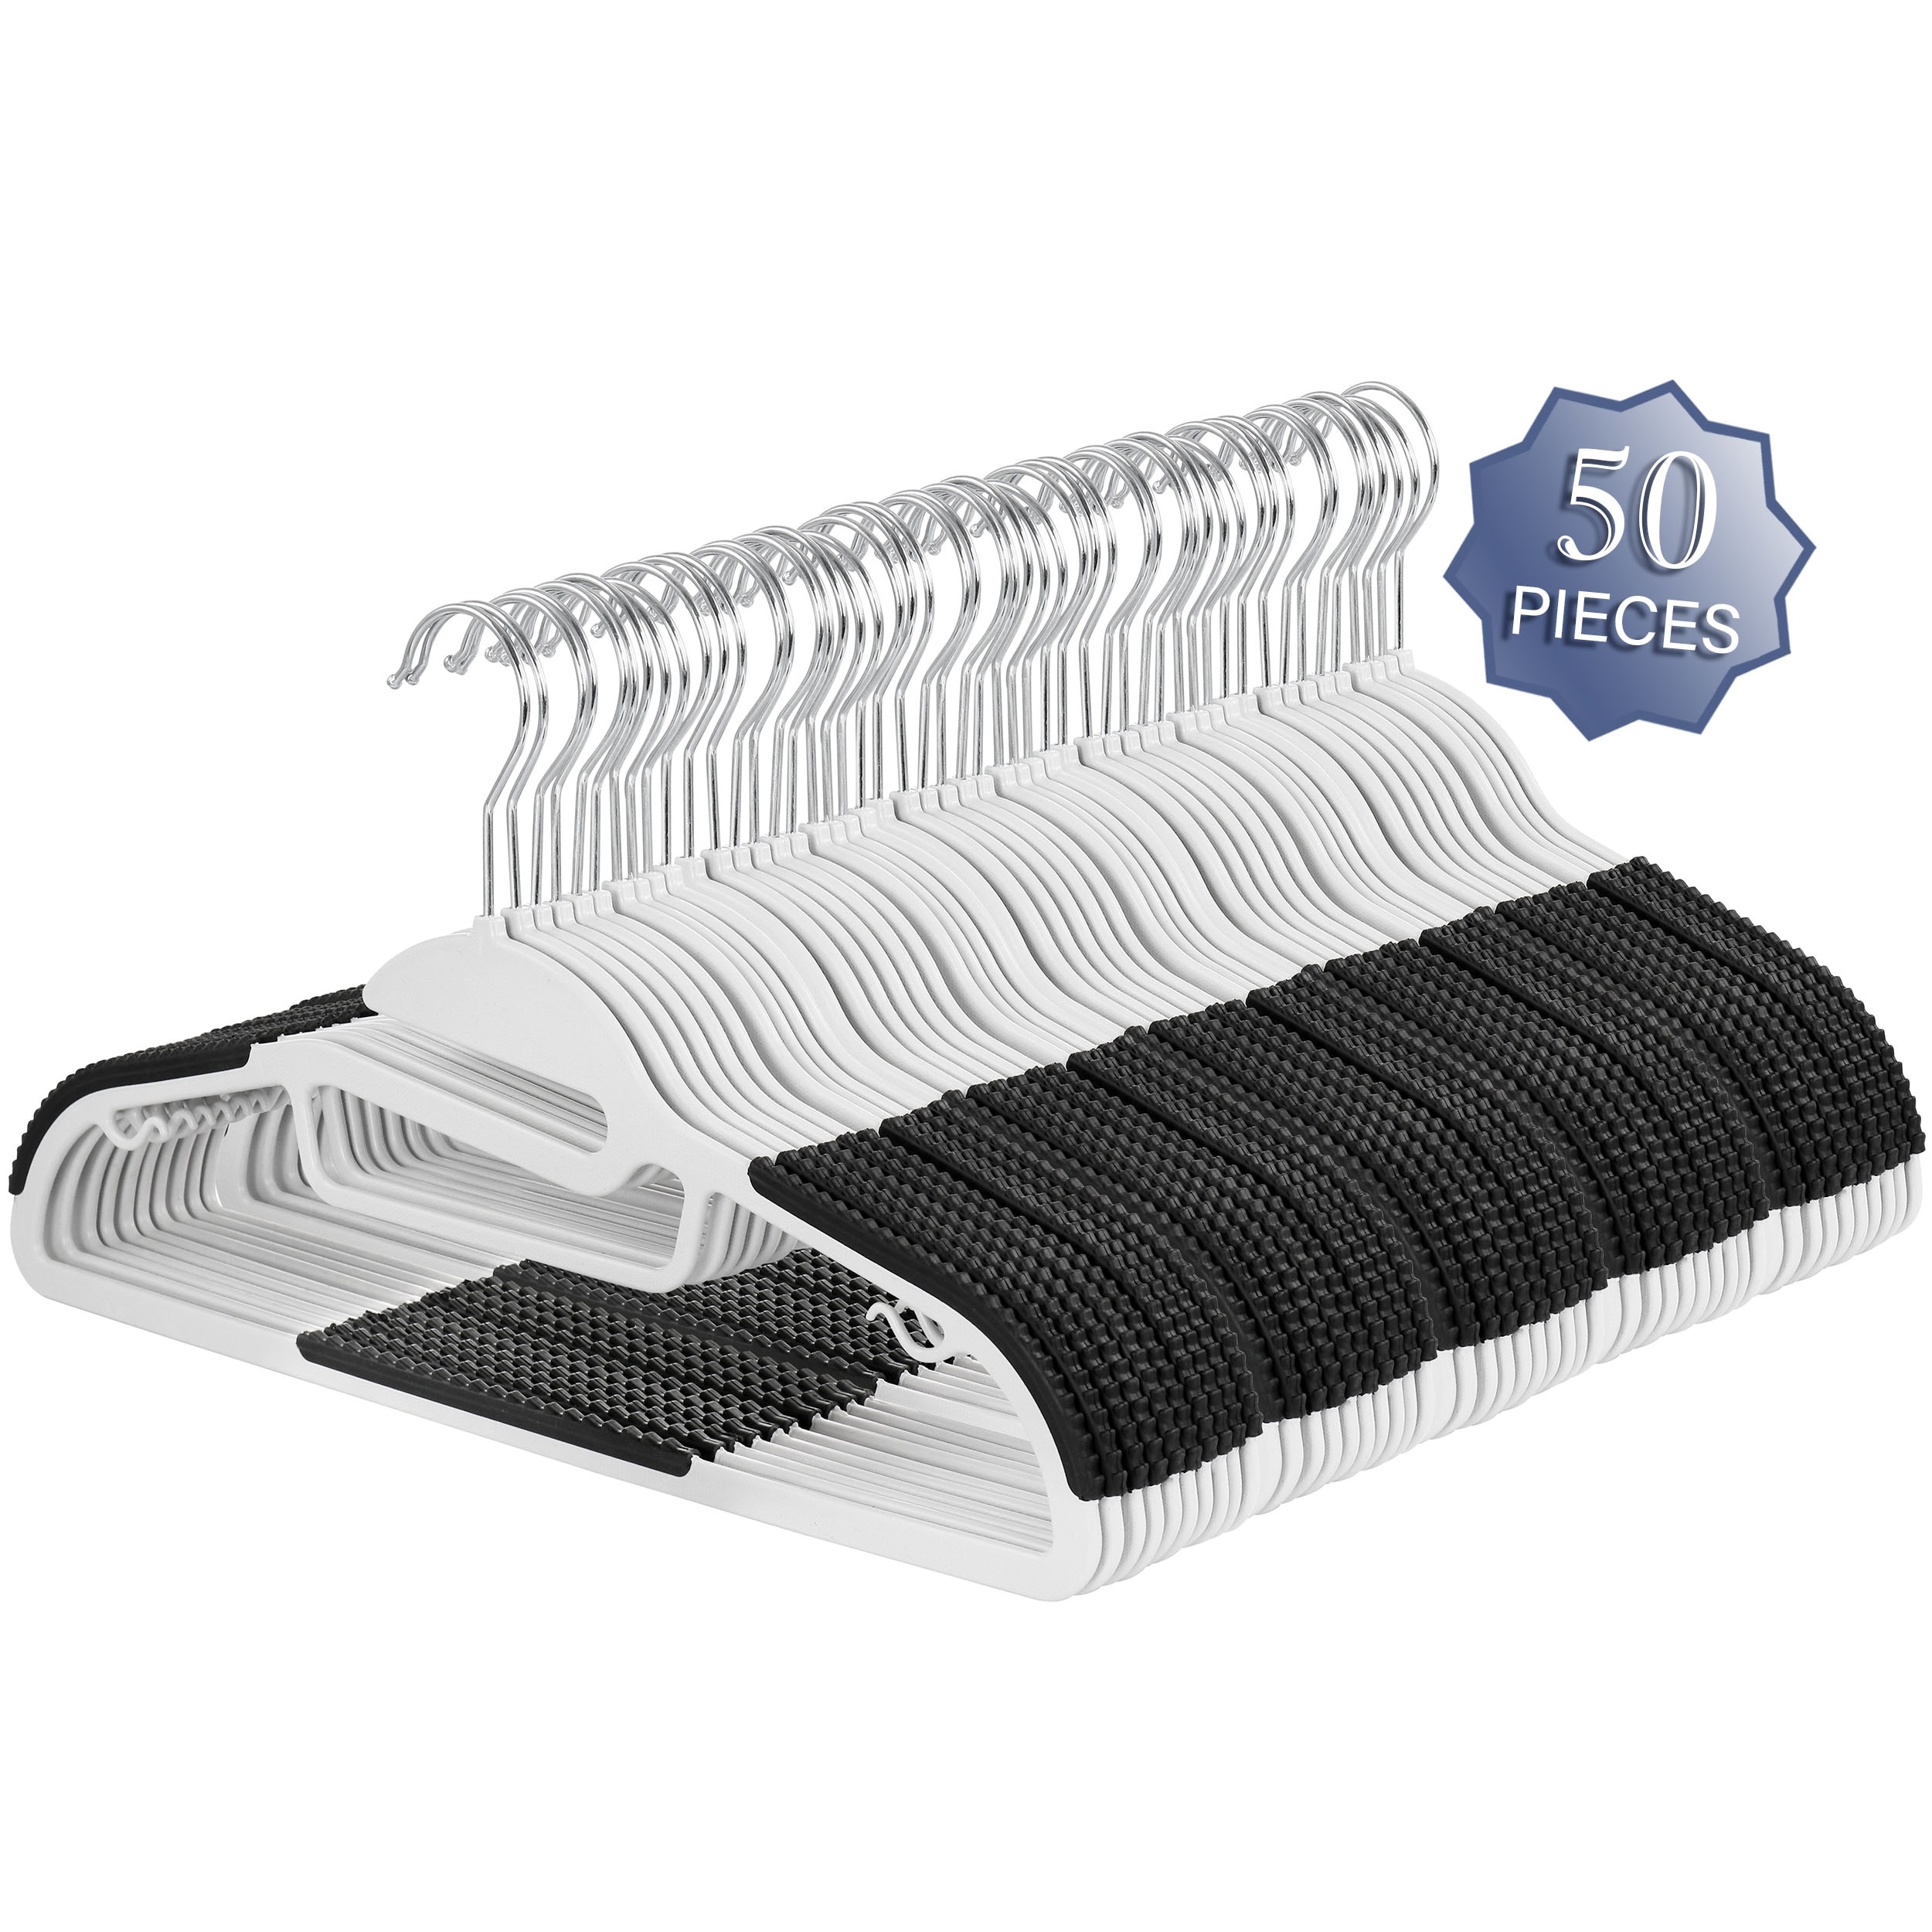 https://ak1.ostkcdn.com/images/products/is/images/direct/68d3733a9e86242d2dc620d63d68e6eb34305fb7/Elama-Home-50-Piece-Non-Slip-Hanger-with-U-slide-in-White-and-Black.jpg